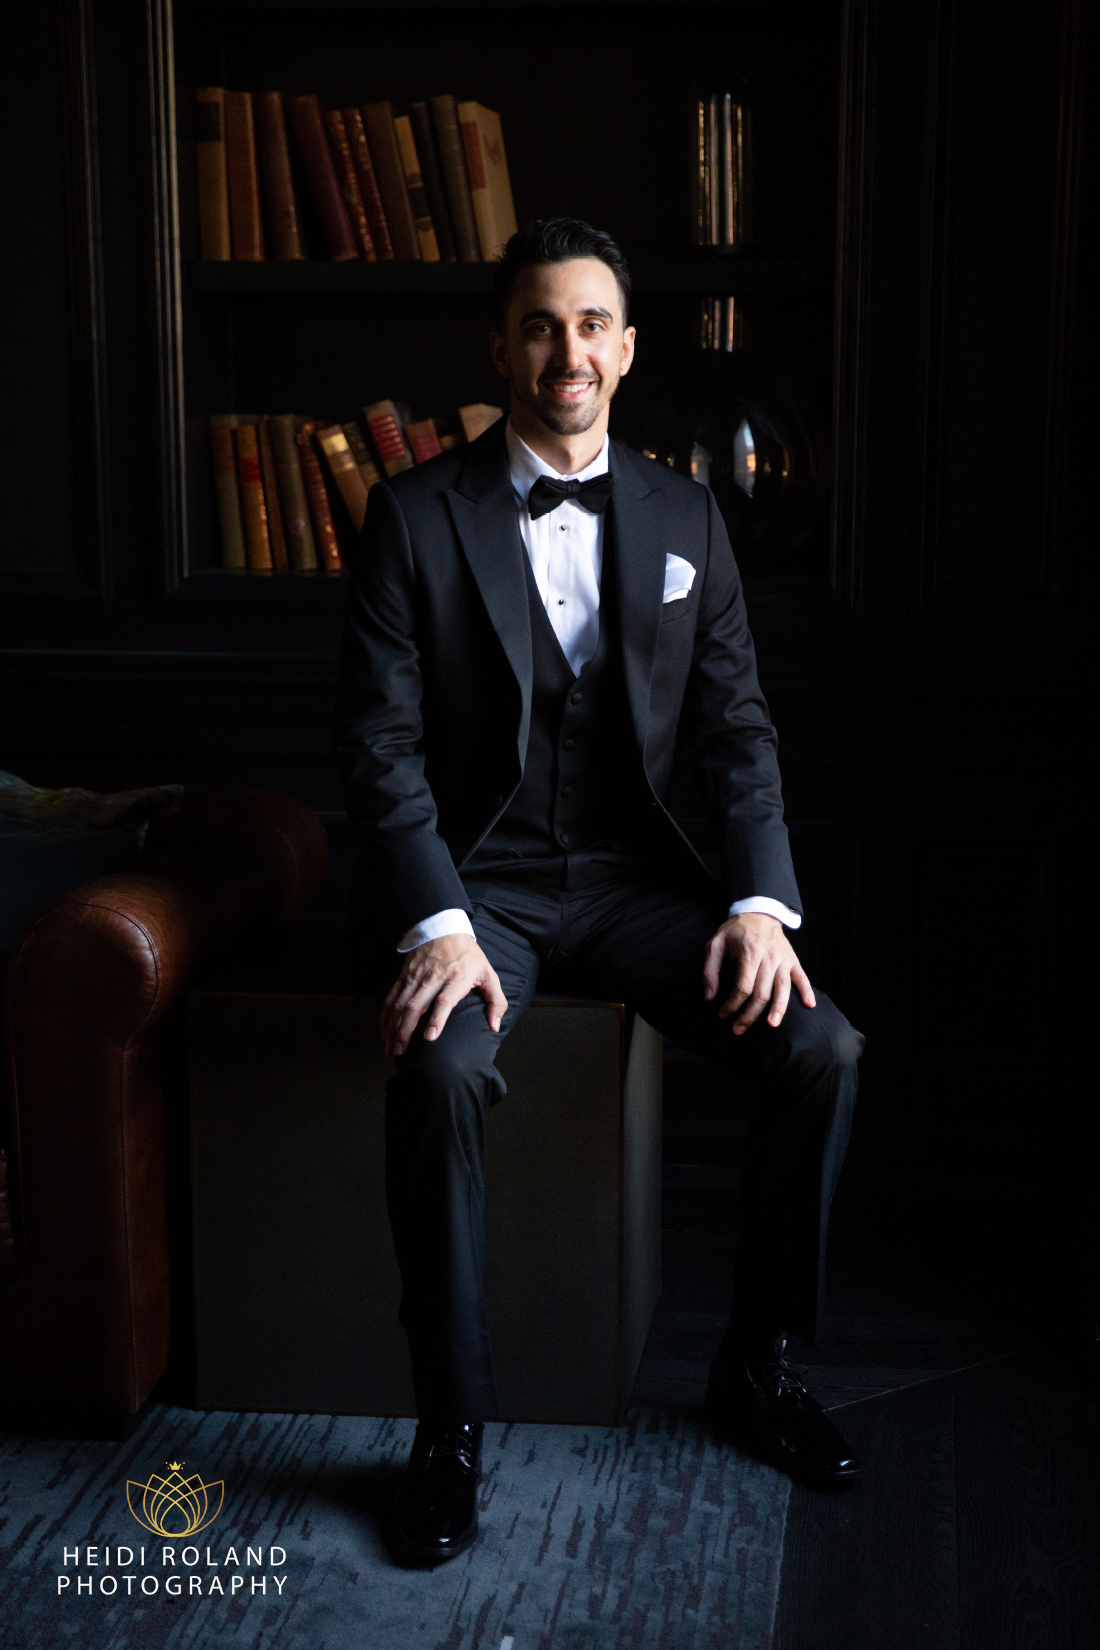 Groom portrait on wedding day in library room by Heidi Roland Photography